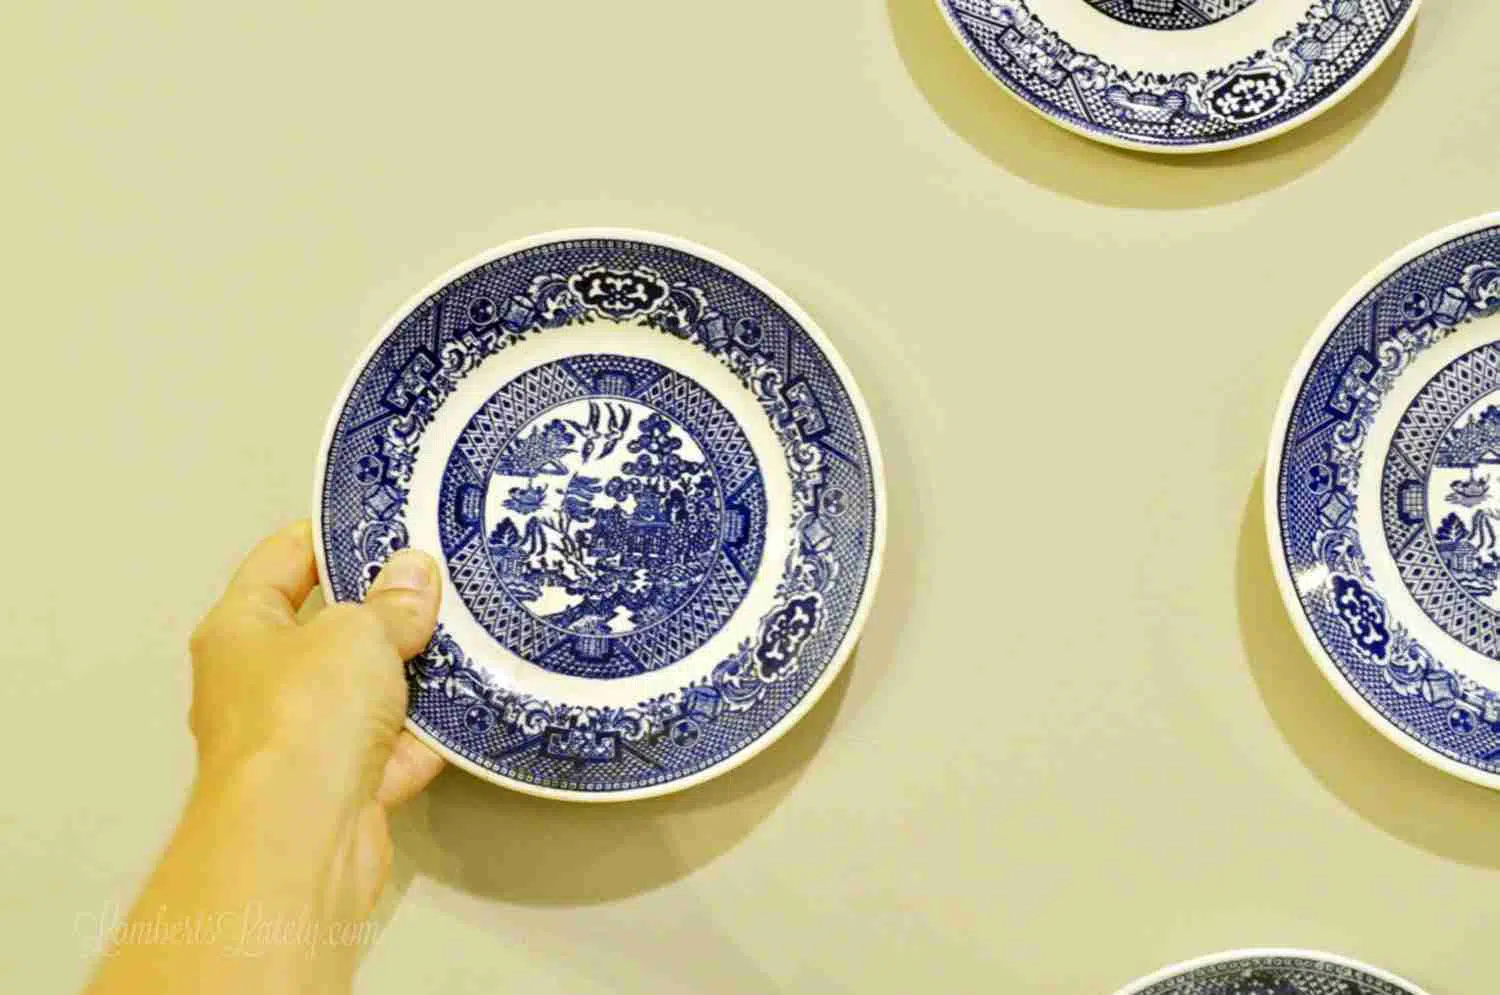 placing a plate on a wall.